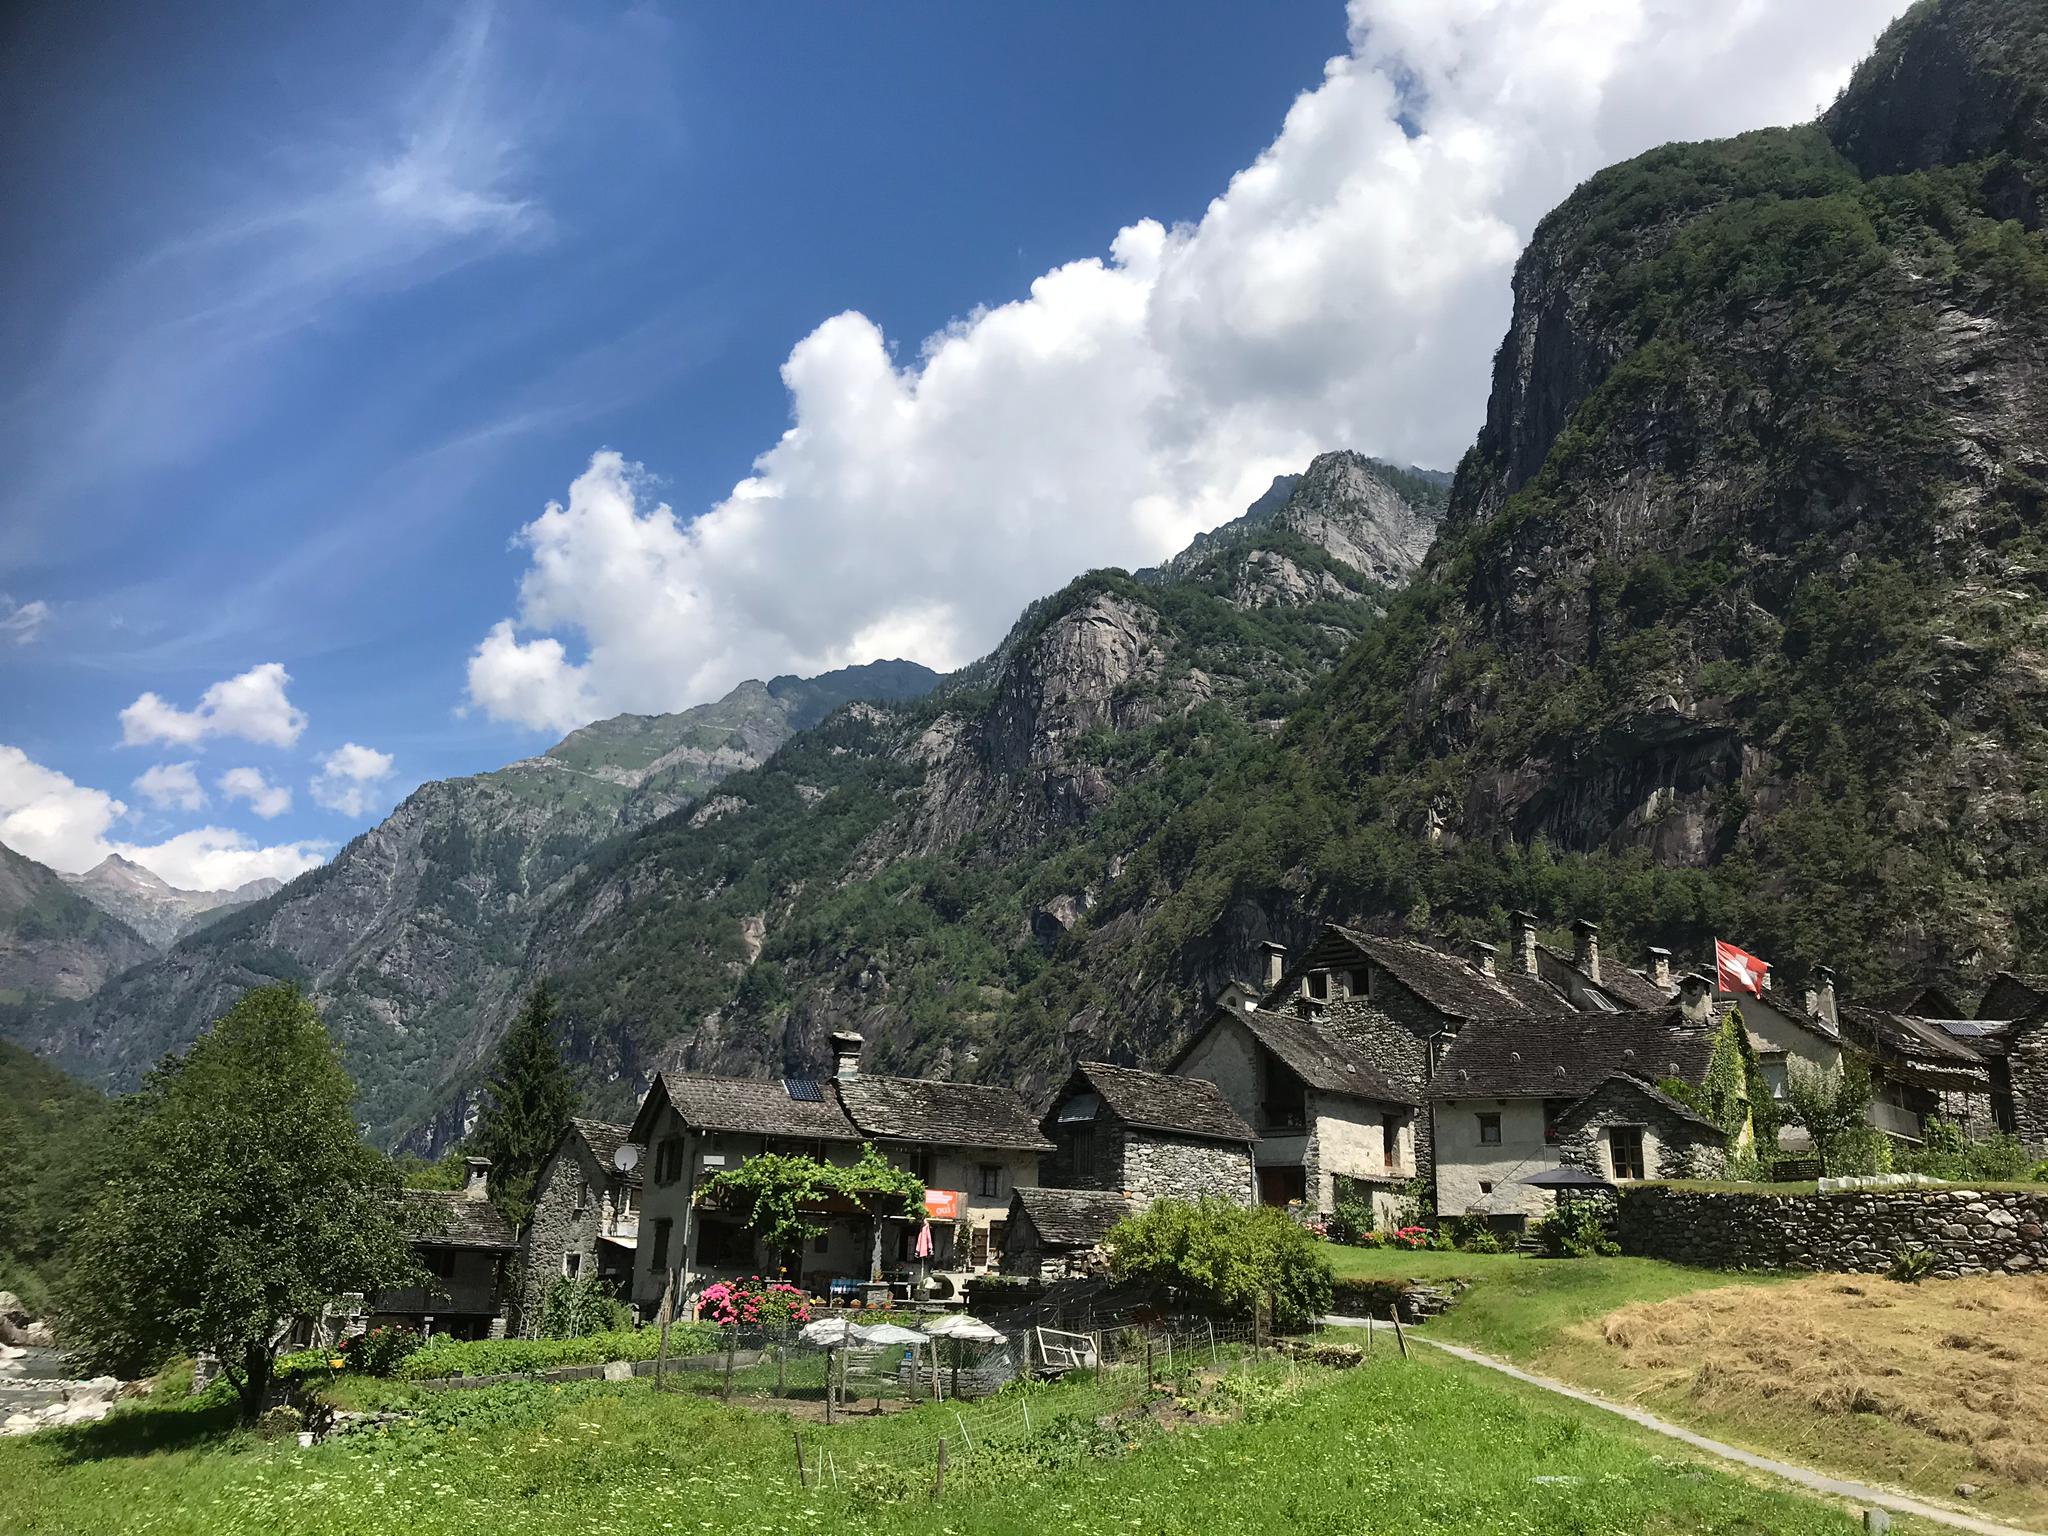 A group of old rustic houses surrounded by mountains. Taken in Bavona Valley in Ticino, Switzerland.